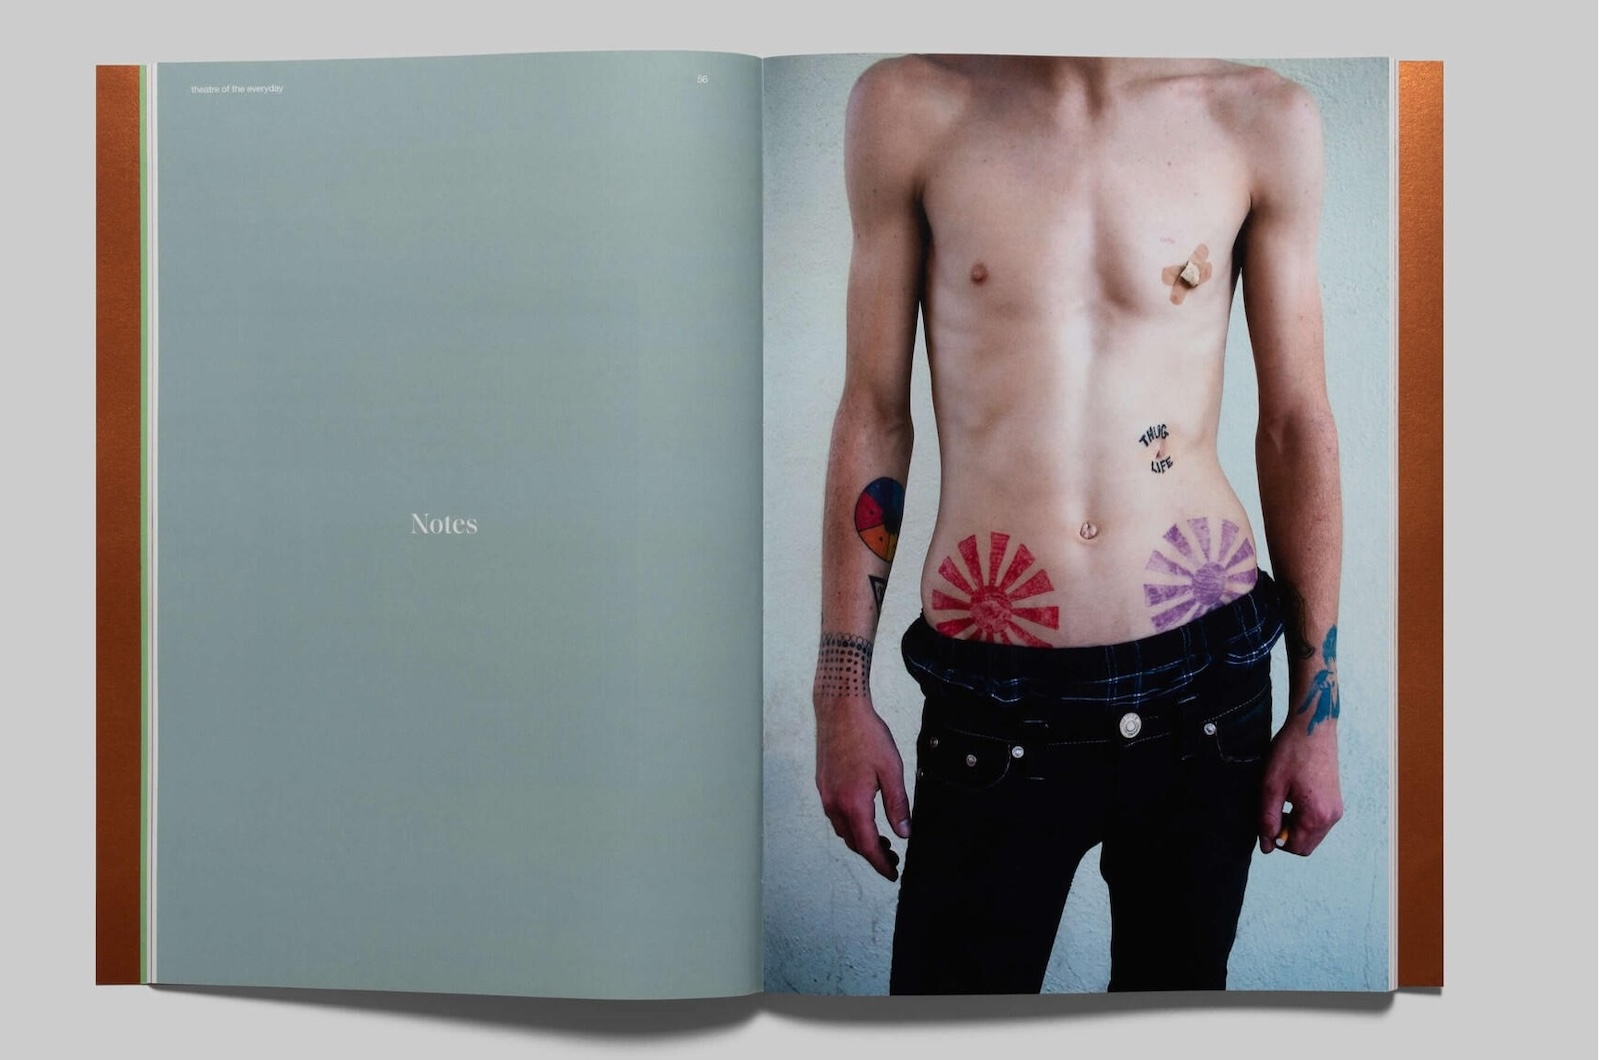 A two-page spread in a book shows the left hand page all grey with the word “Notes” in white, centered on the page, and on the right-hand page, a man’s nude torso from collarbone to hips shows a tattooed body with two small bandages crossed over the man’s left nipple; his black pants set off the pale skin.